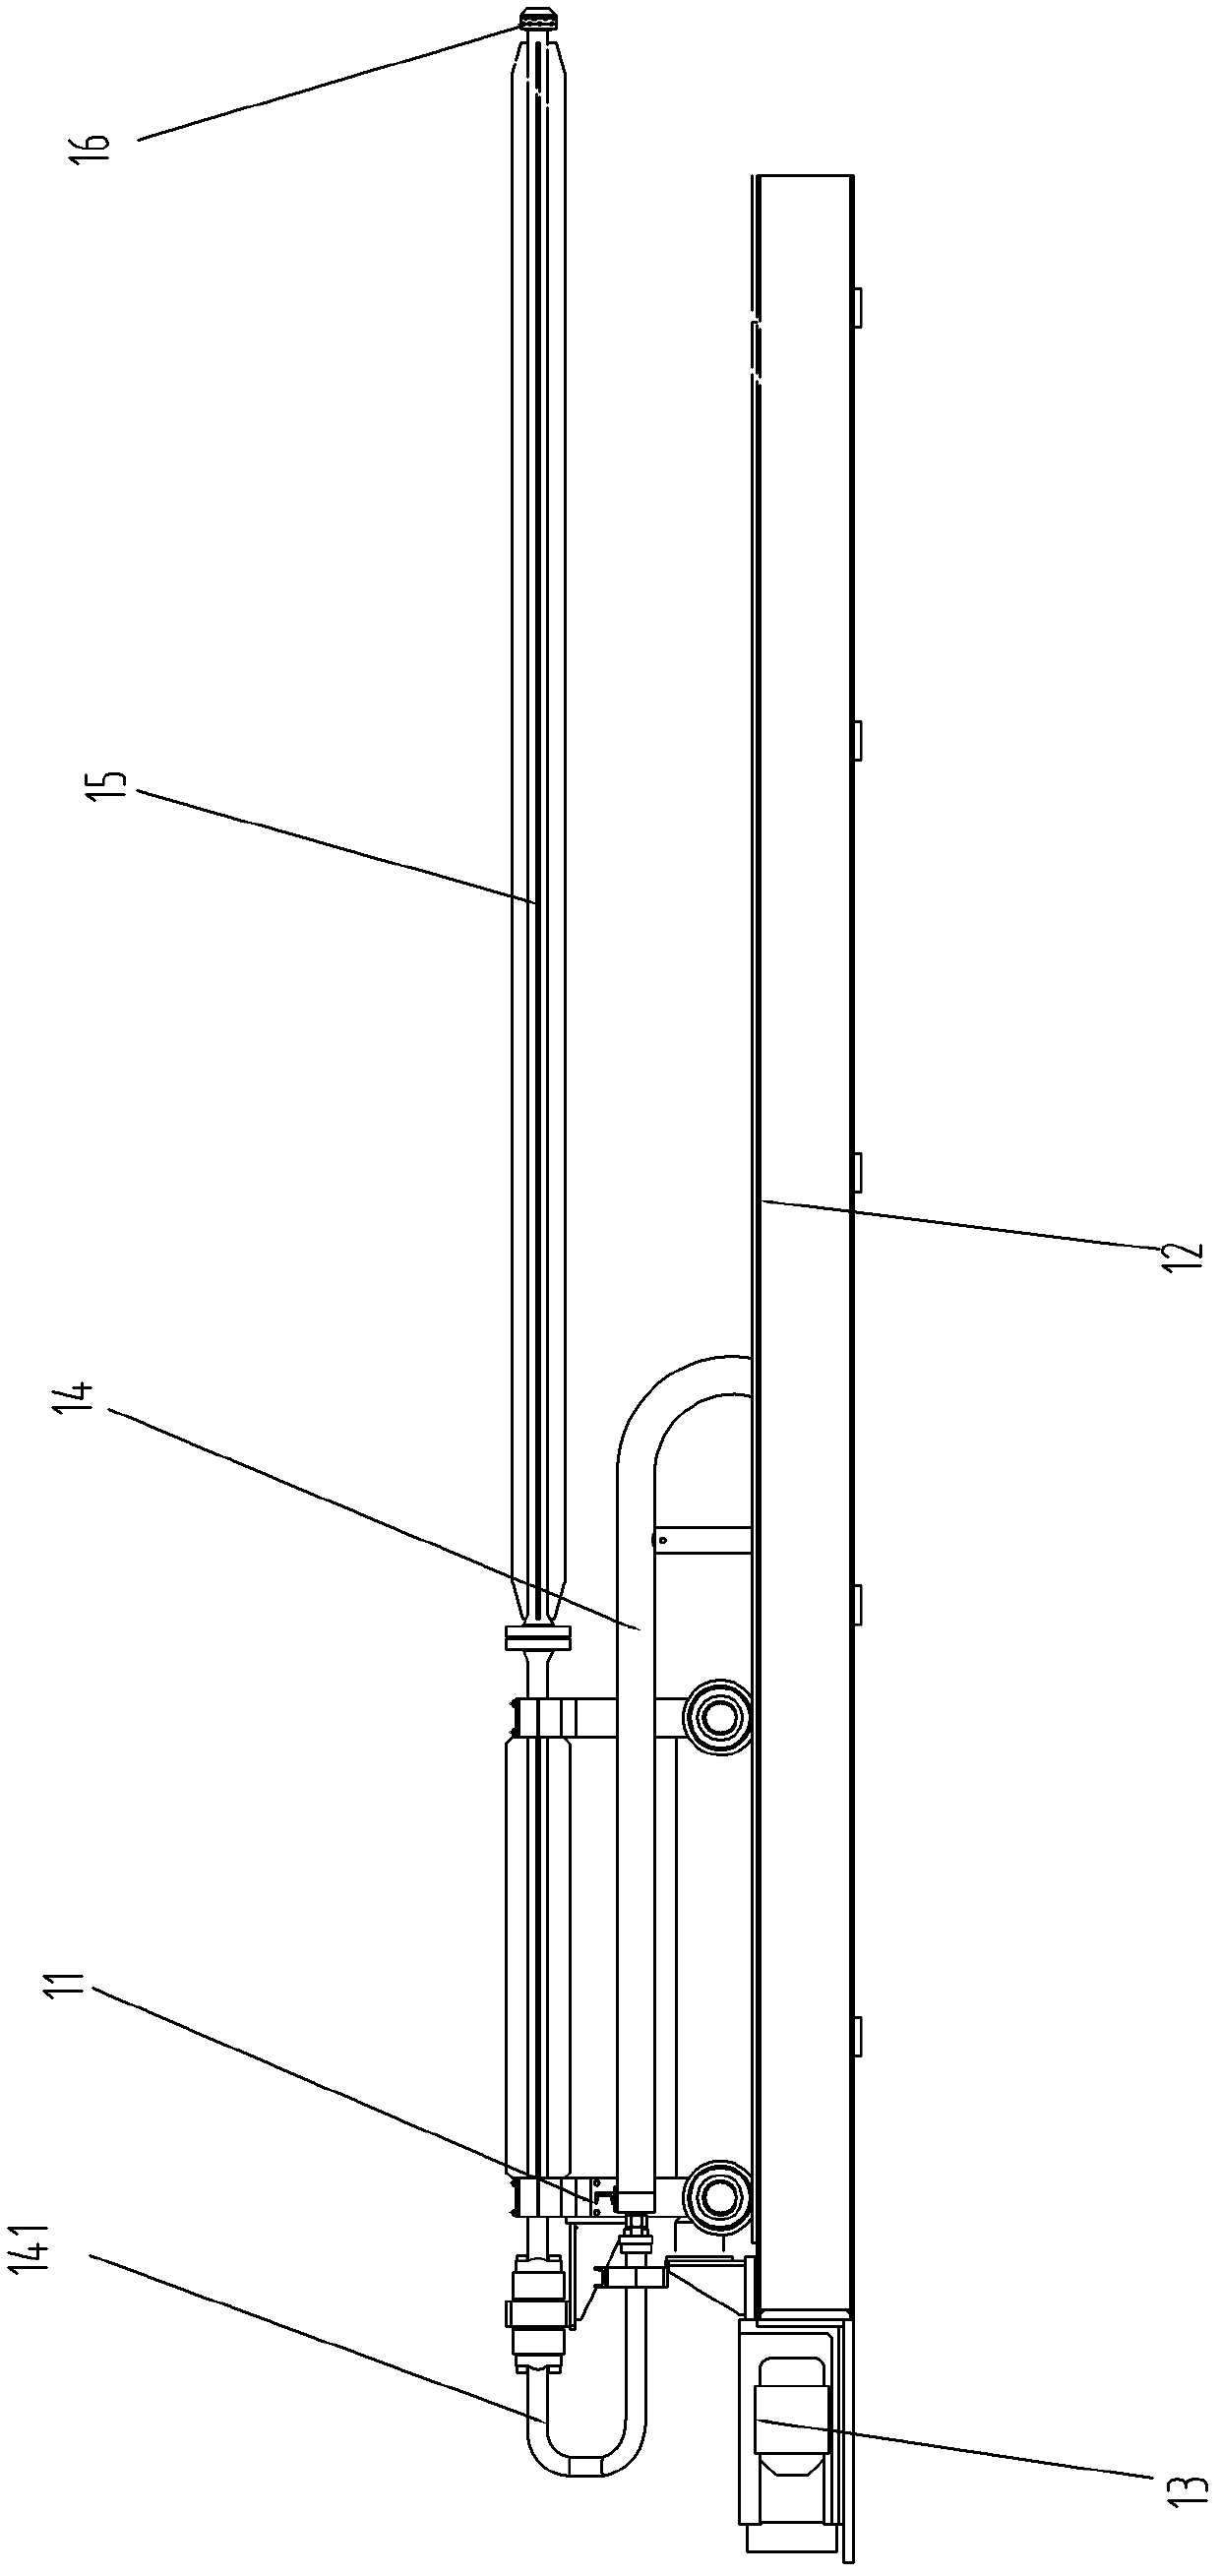 Device for descaling by high-pressure water